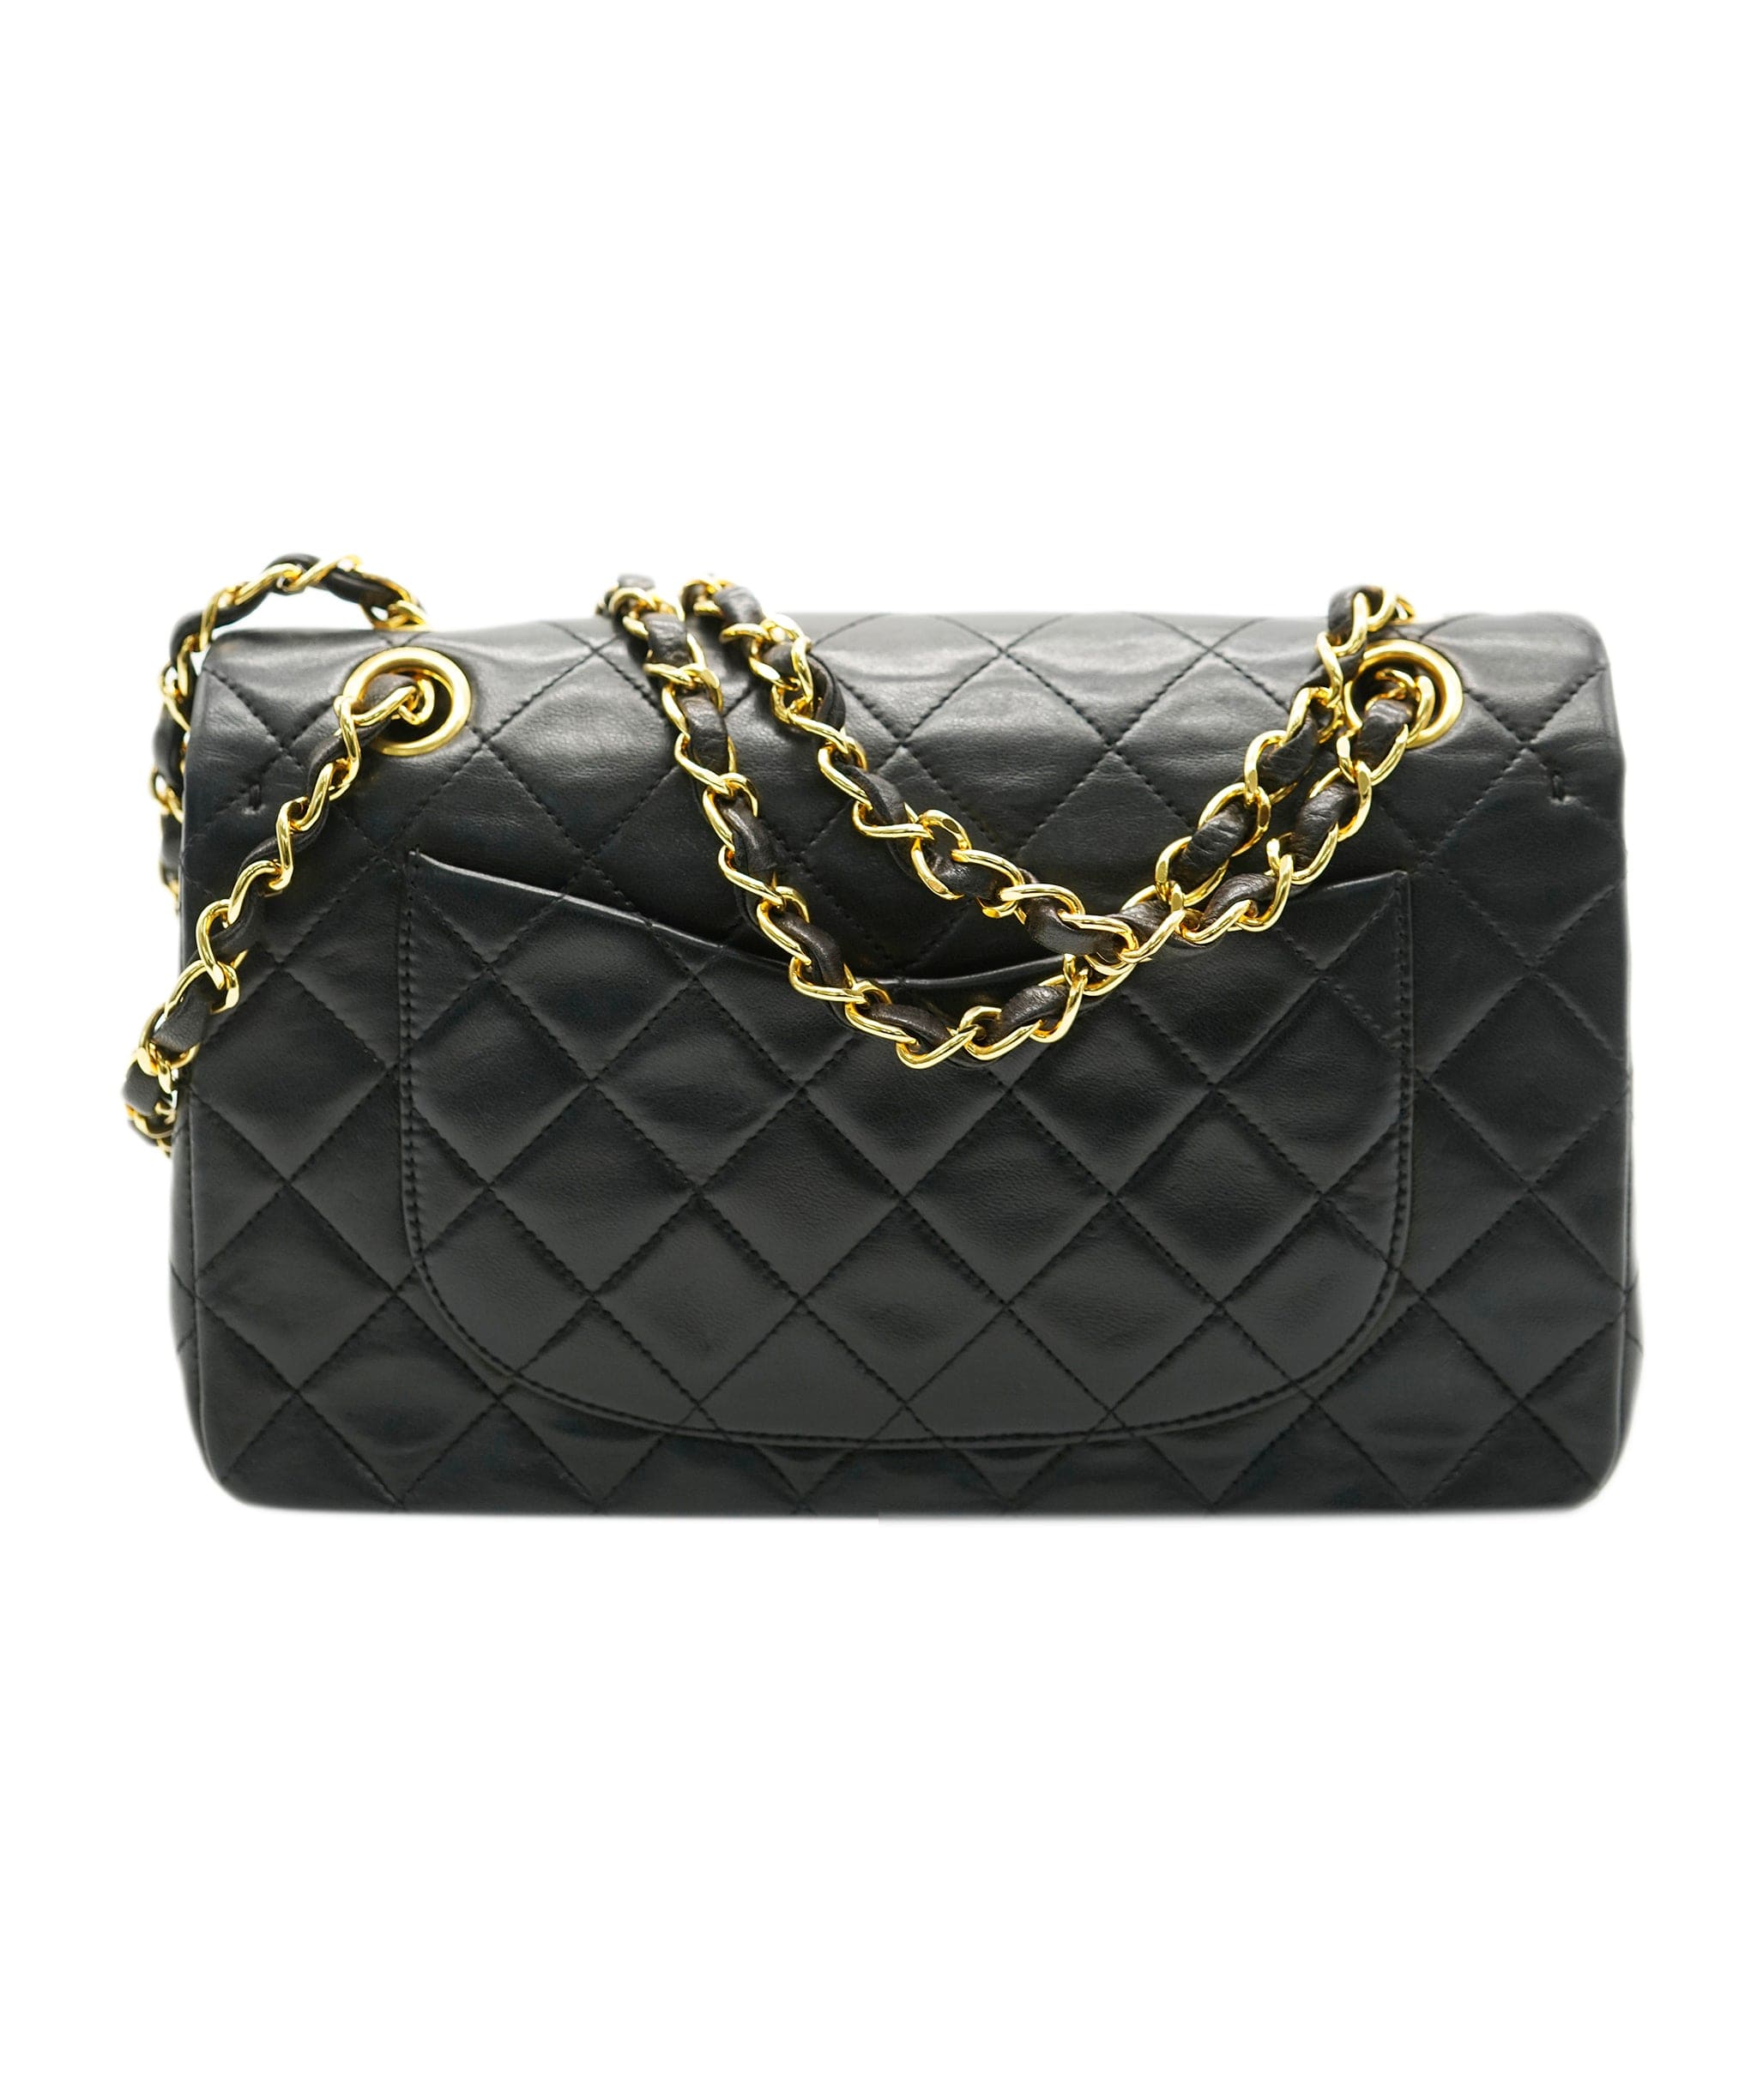 Chanel Chanel Vintage Classic Flap Small Black Lambskin GHW #3 ASL10616